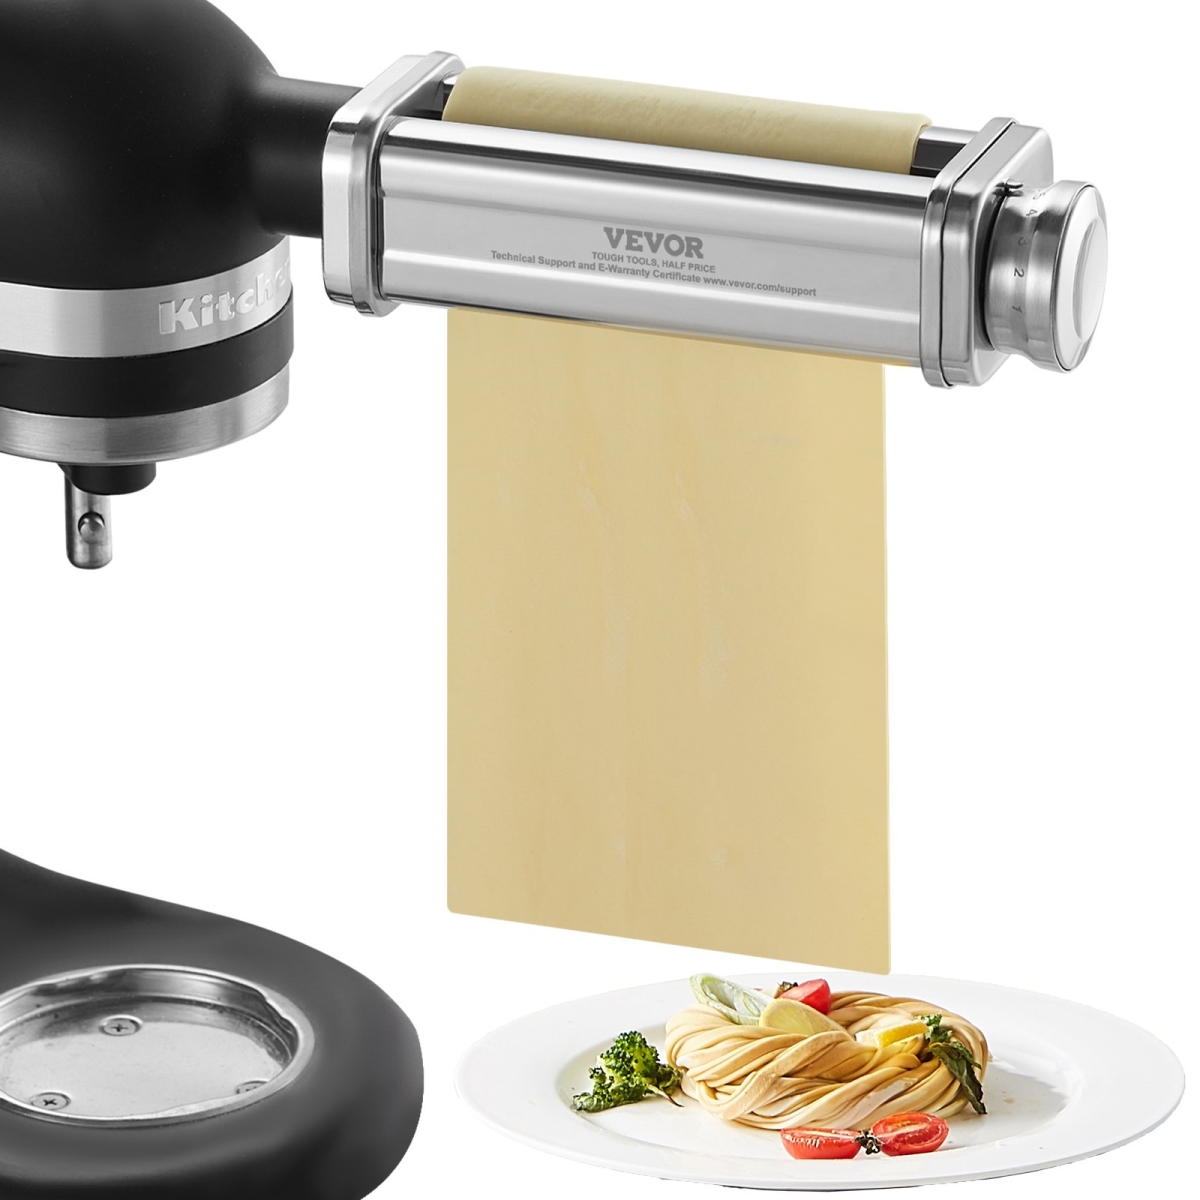 Picture of Vevor YDLMGL1JT00046BE1V0 Stainless Steel Pasta Roller Cutter Attachment Kitchen Aid Stand Mixer 8 Adjustable Thickness Knob Pasta Maker